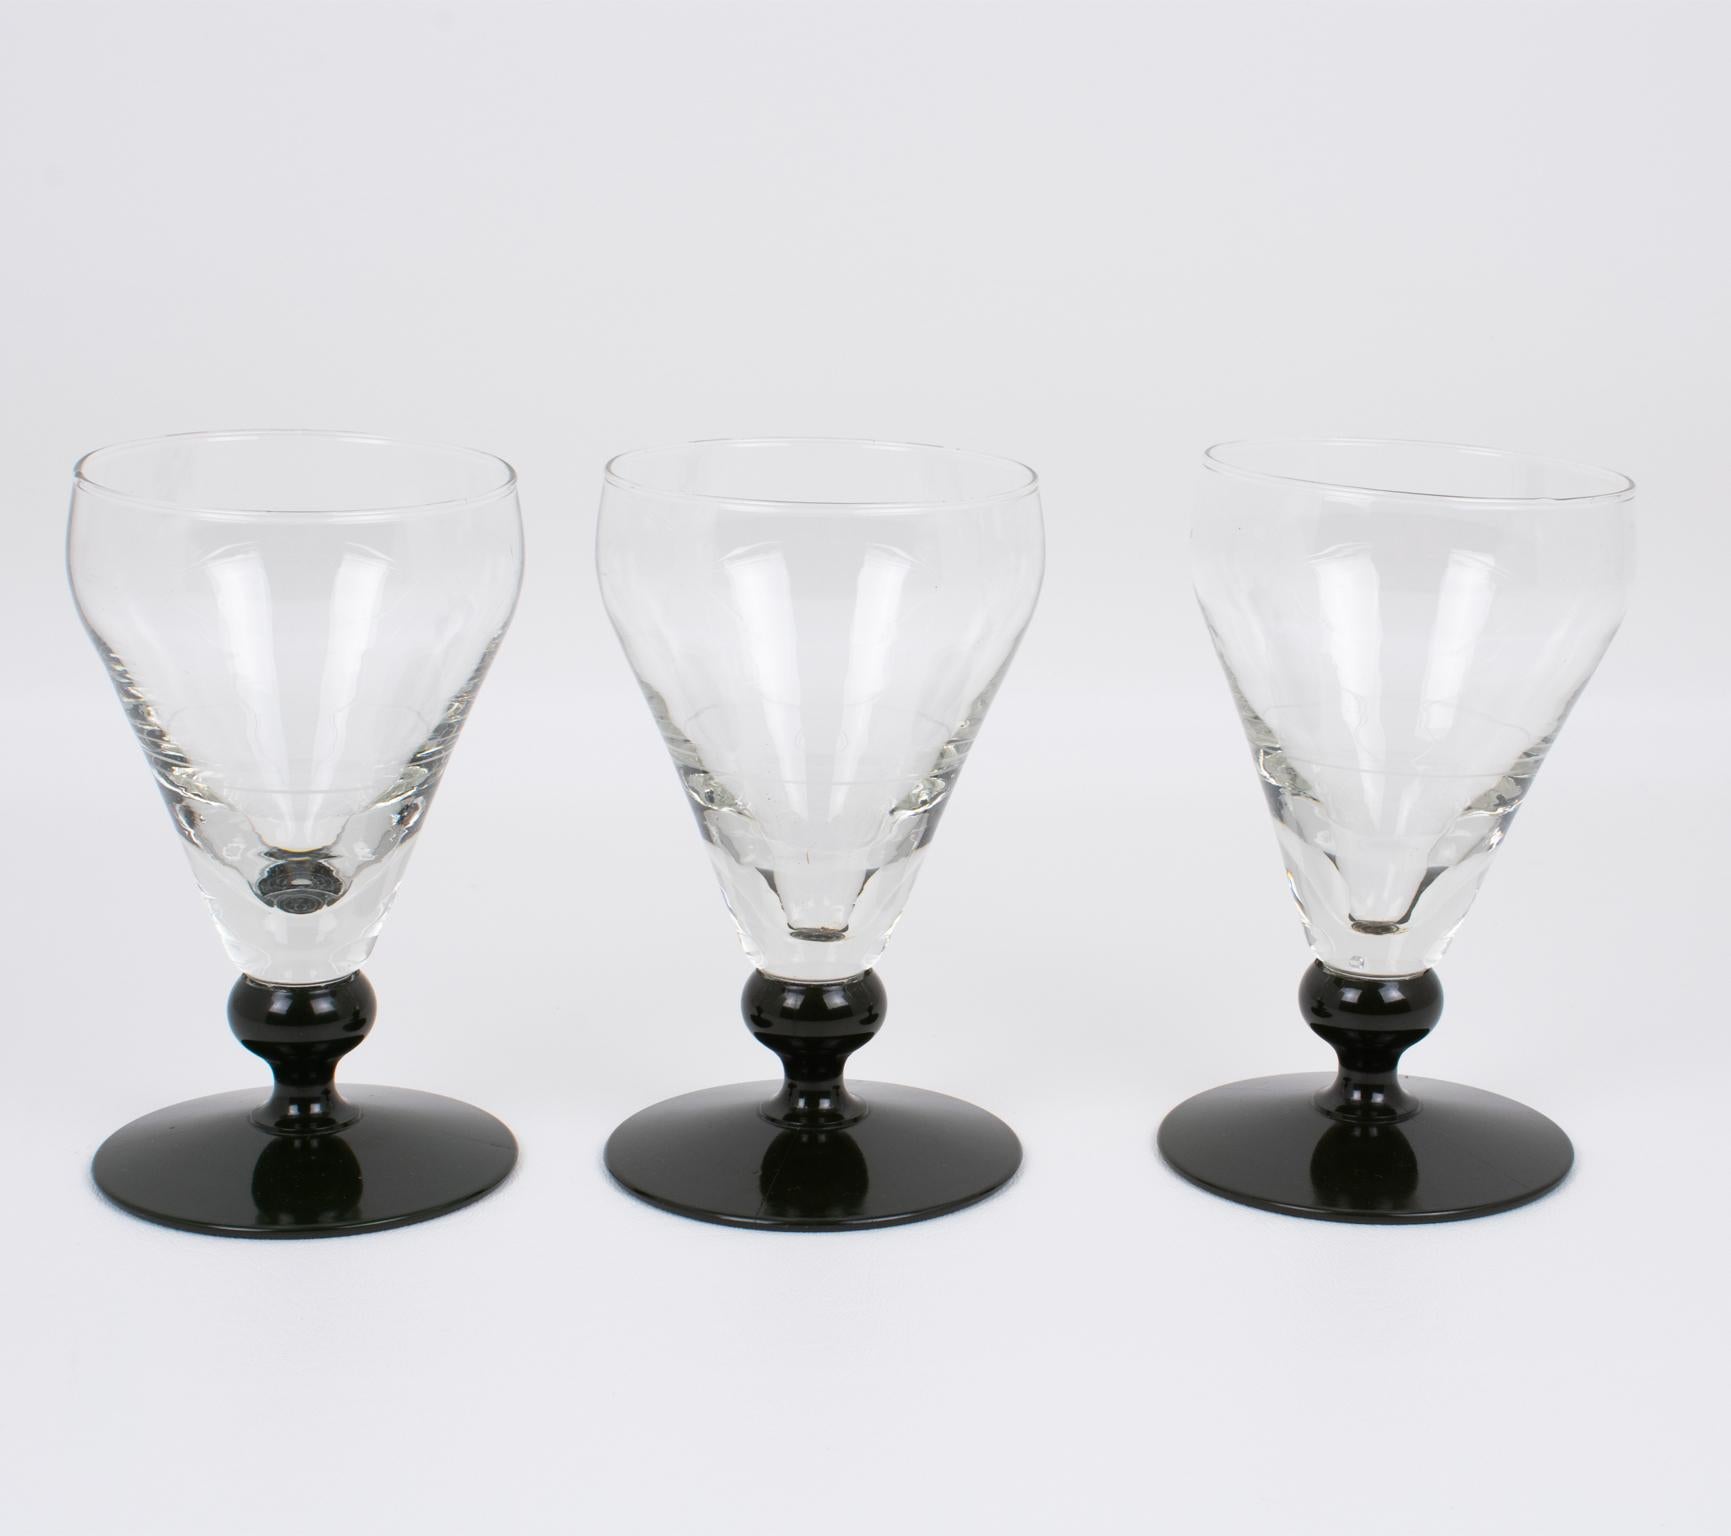 An authentic set of three French Absinthe glasses manufactured by Franckhauser in Lyon circa 1910. 
These heavy glasses were used in French Bistros, Bars, or Cafes in the ritual of drinking the addictive beverage called 